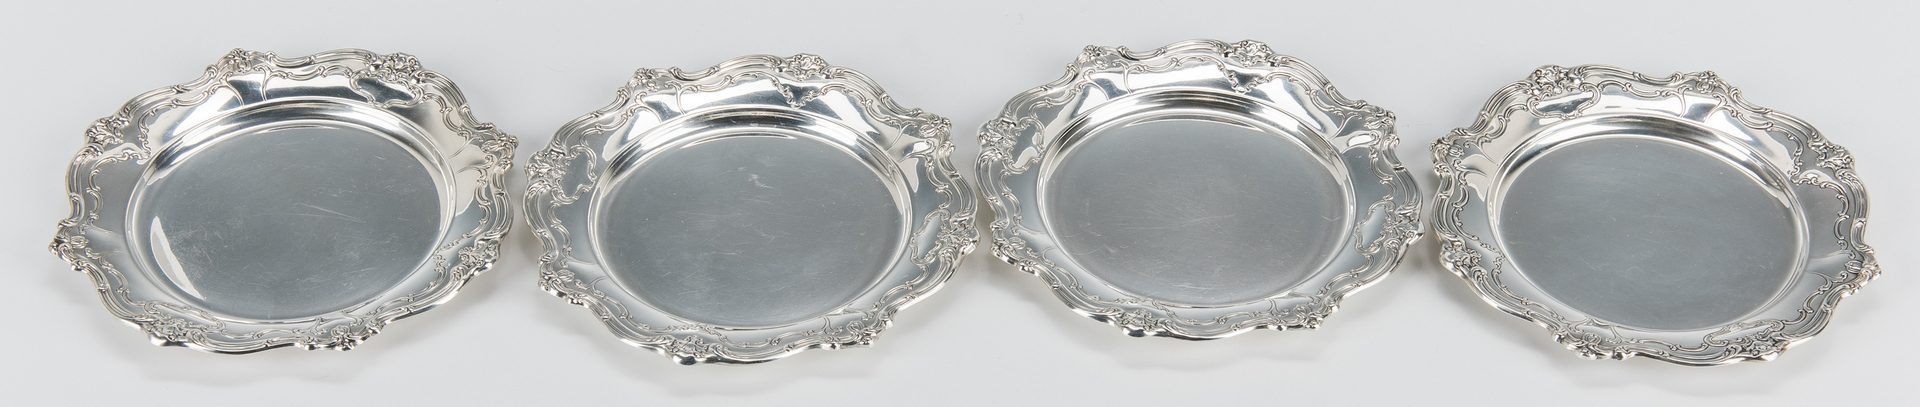 Lot 706: 13 Gorham Sterling Chantilly Bread & Butter Plates